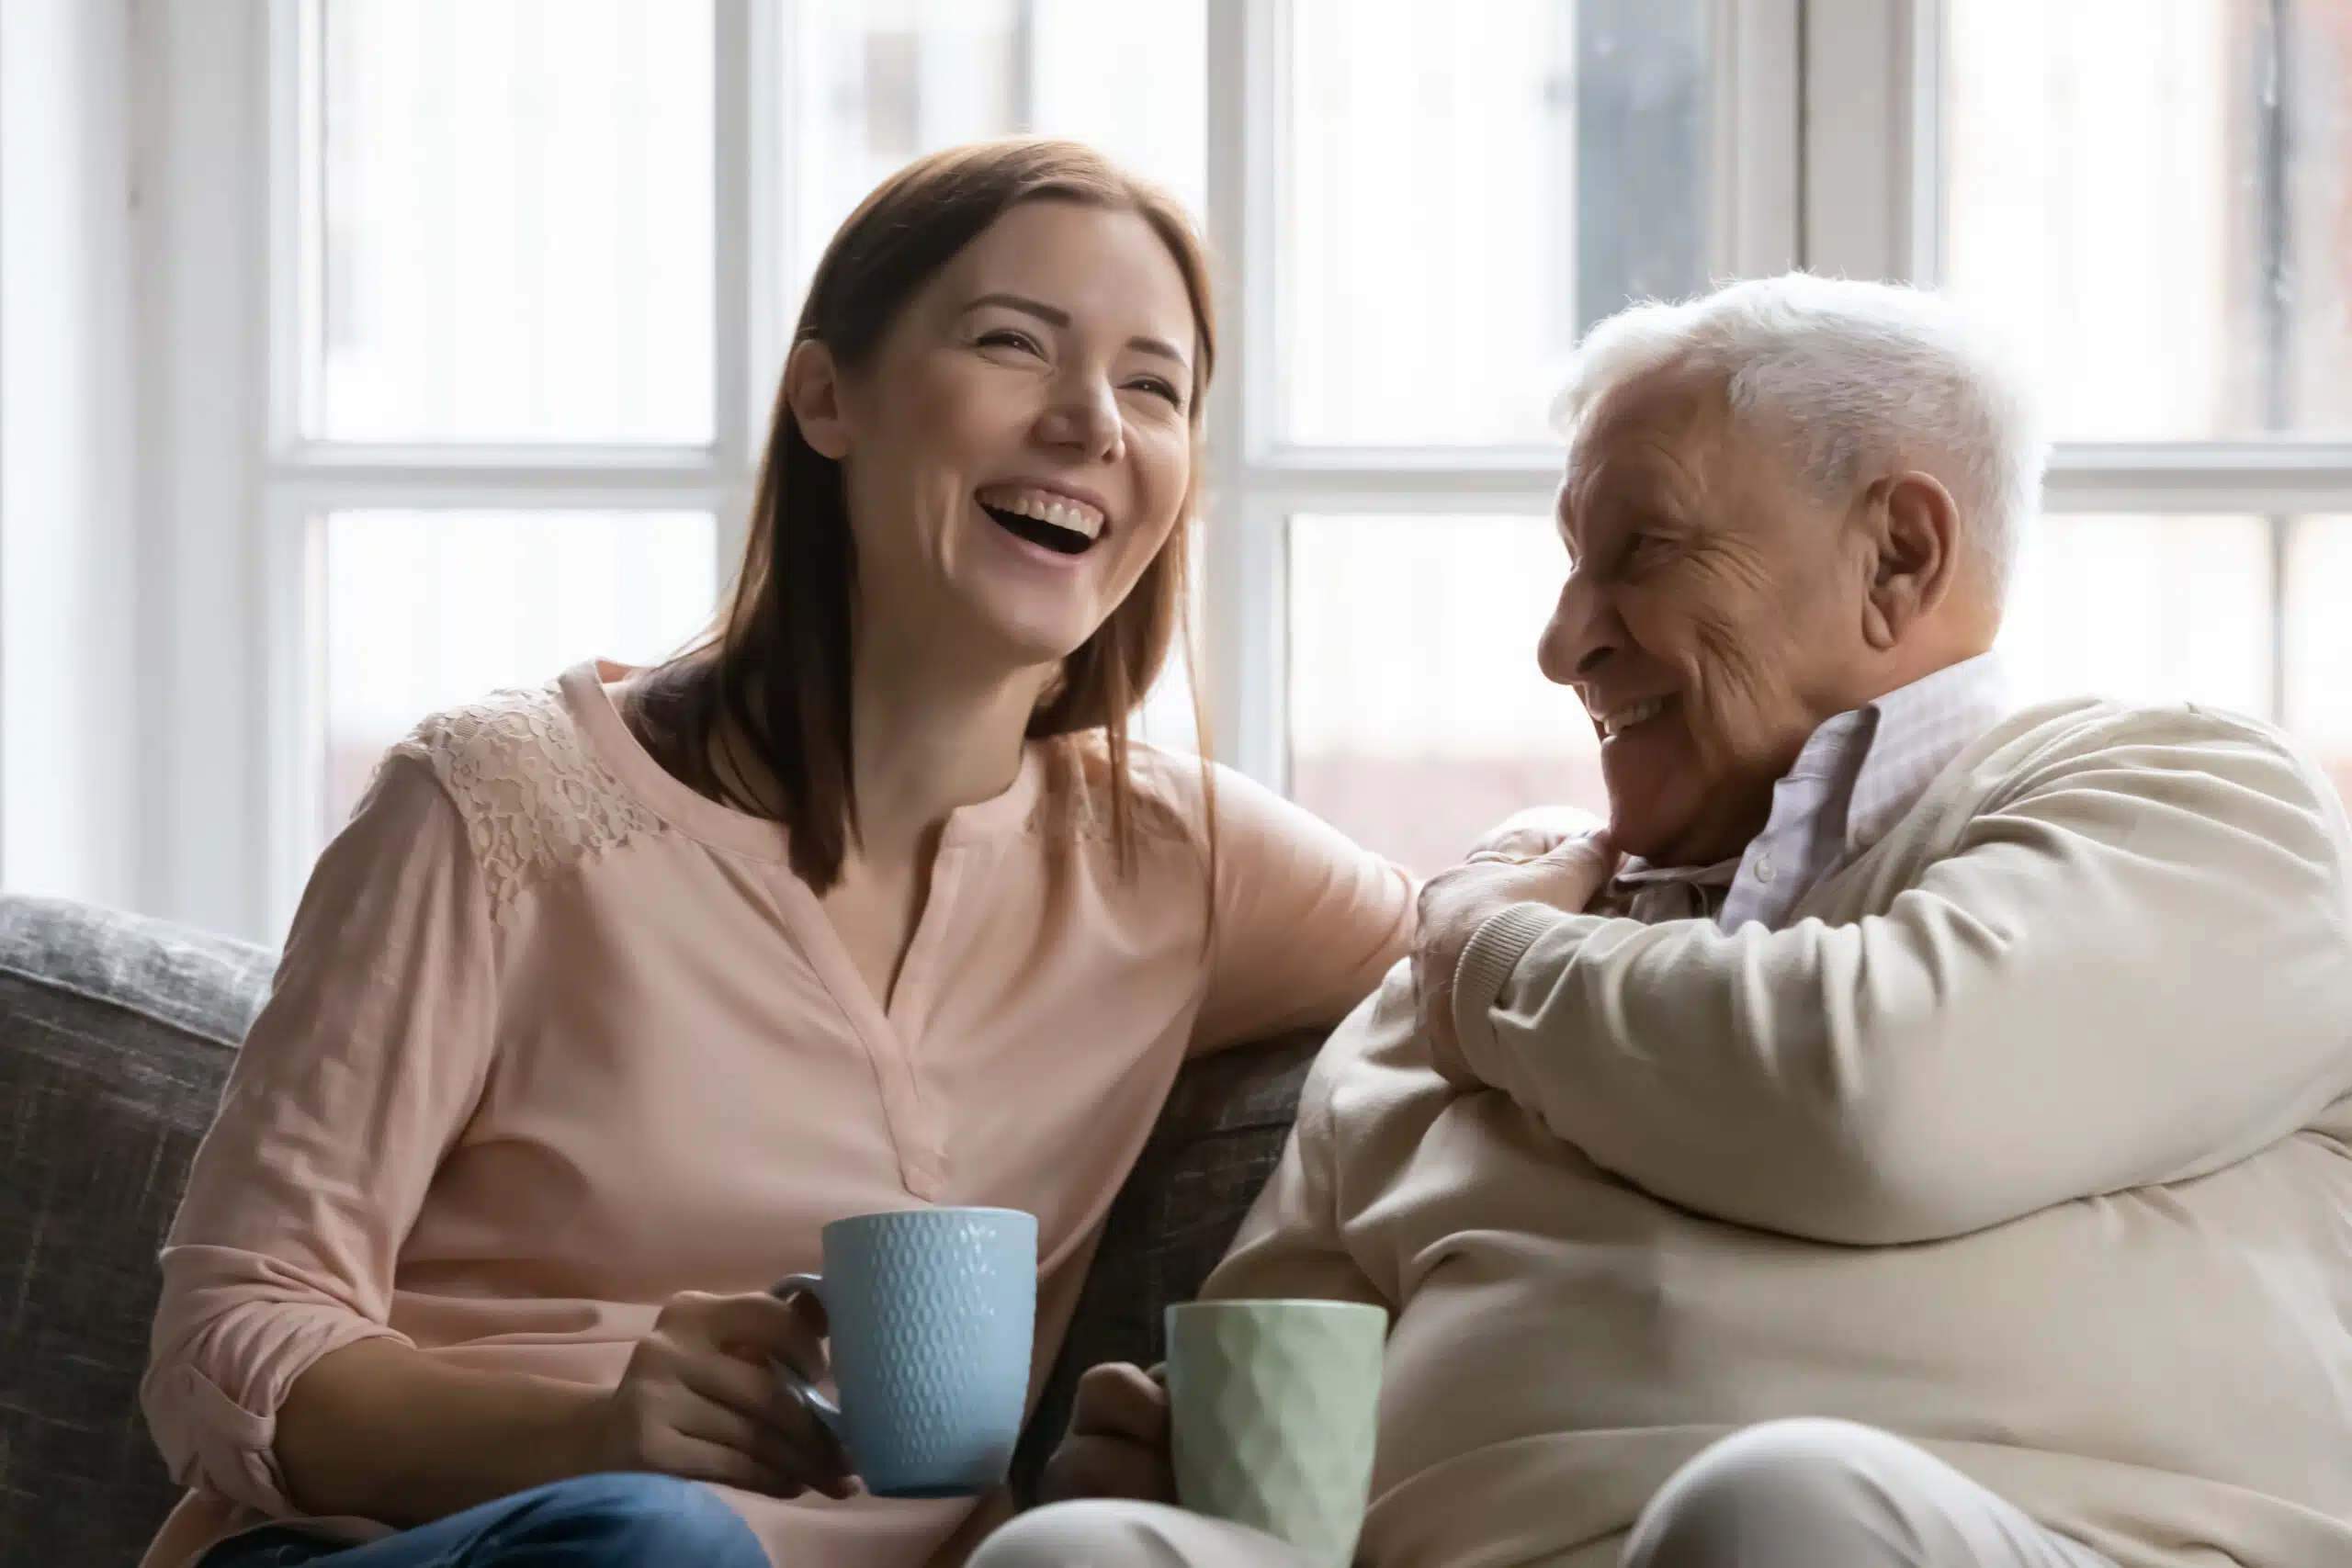 Two people discussing life-saving devices for the elderly.